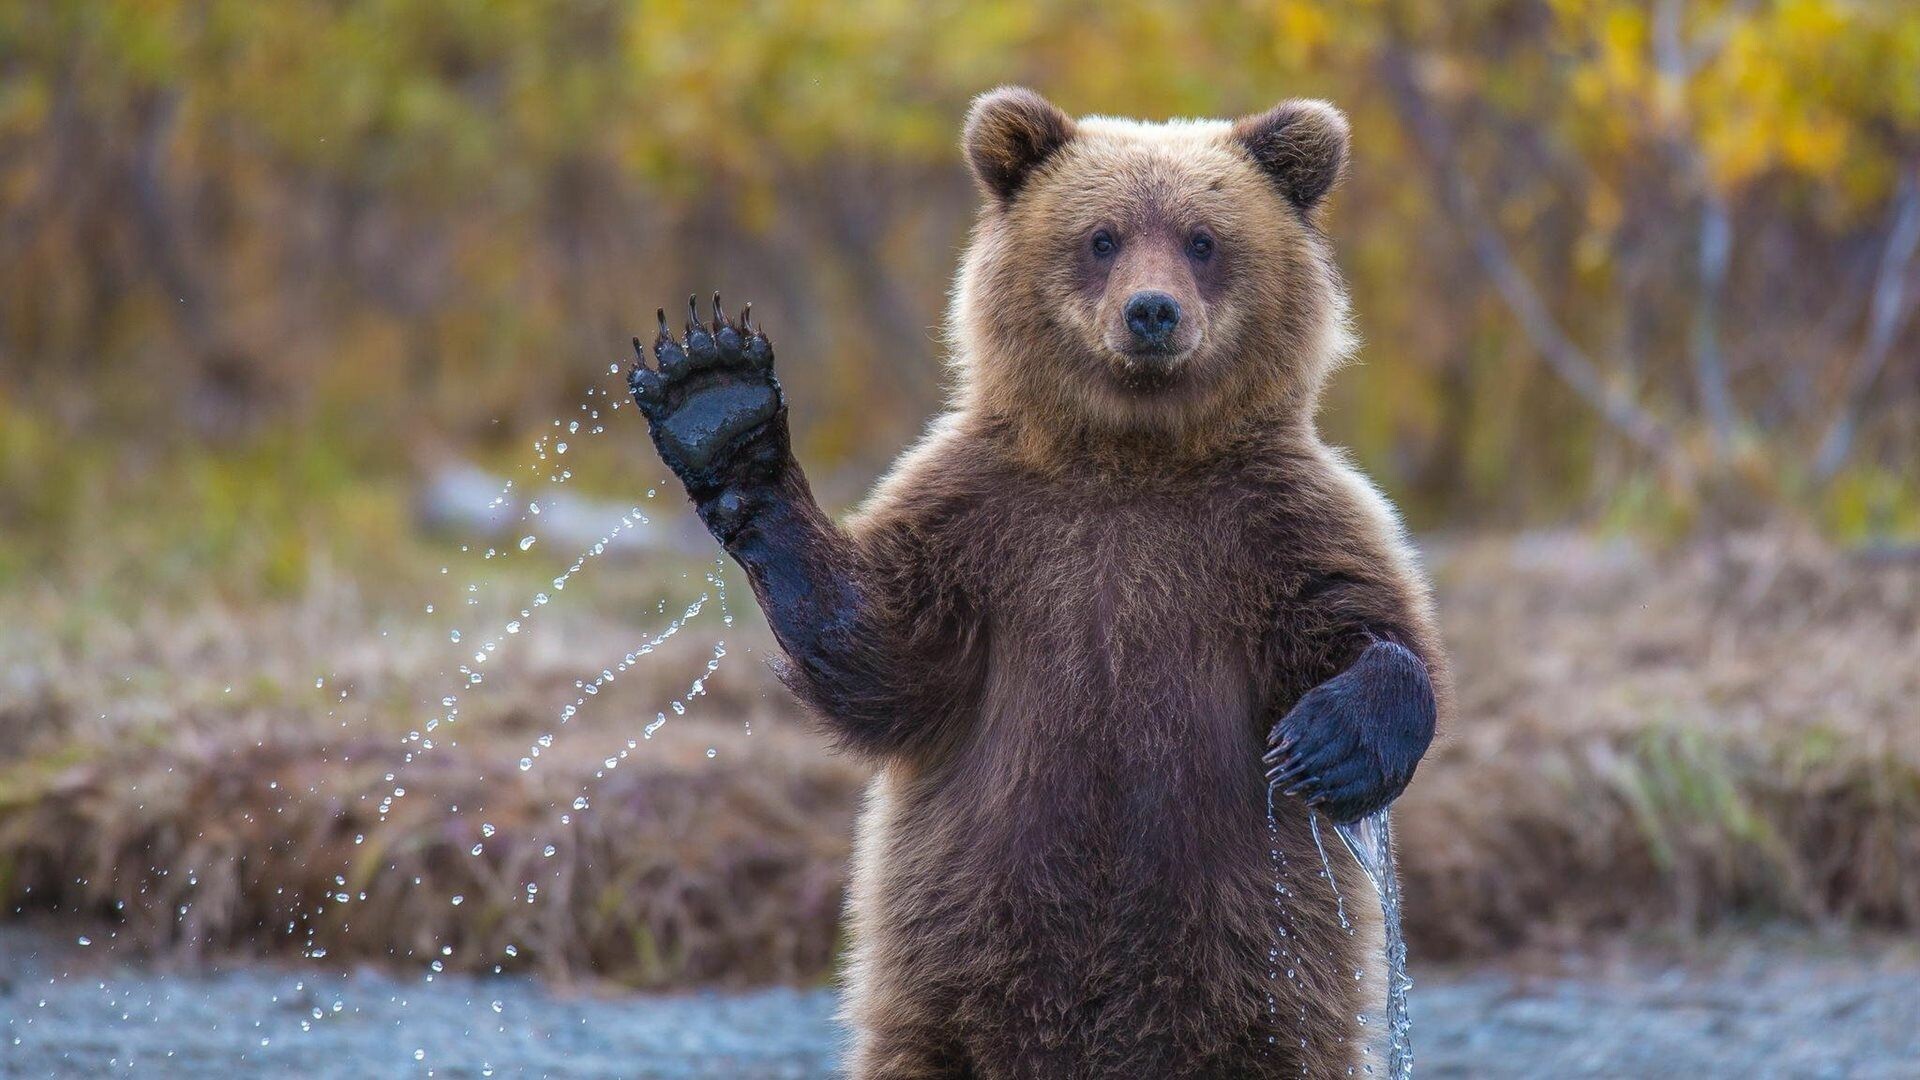 Bear: Animals distinctive by their fur-based bodies and strong claws. 1920x1080 Full HD Wallpaper.